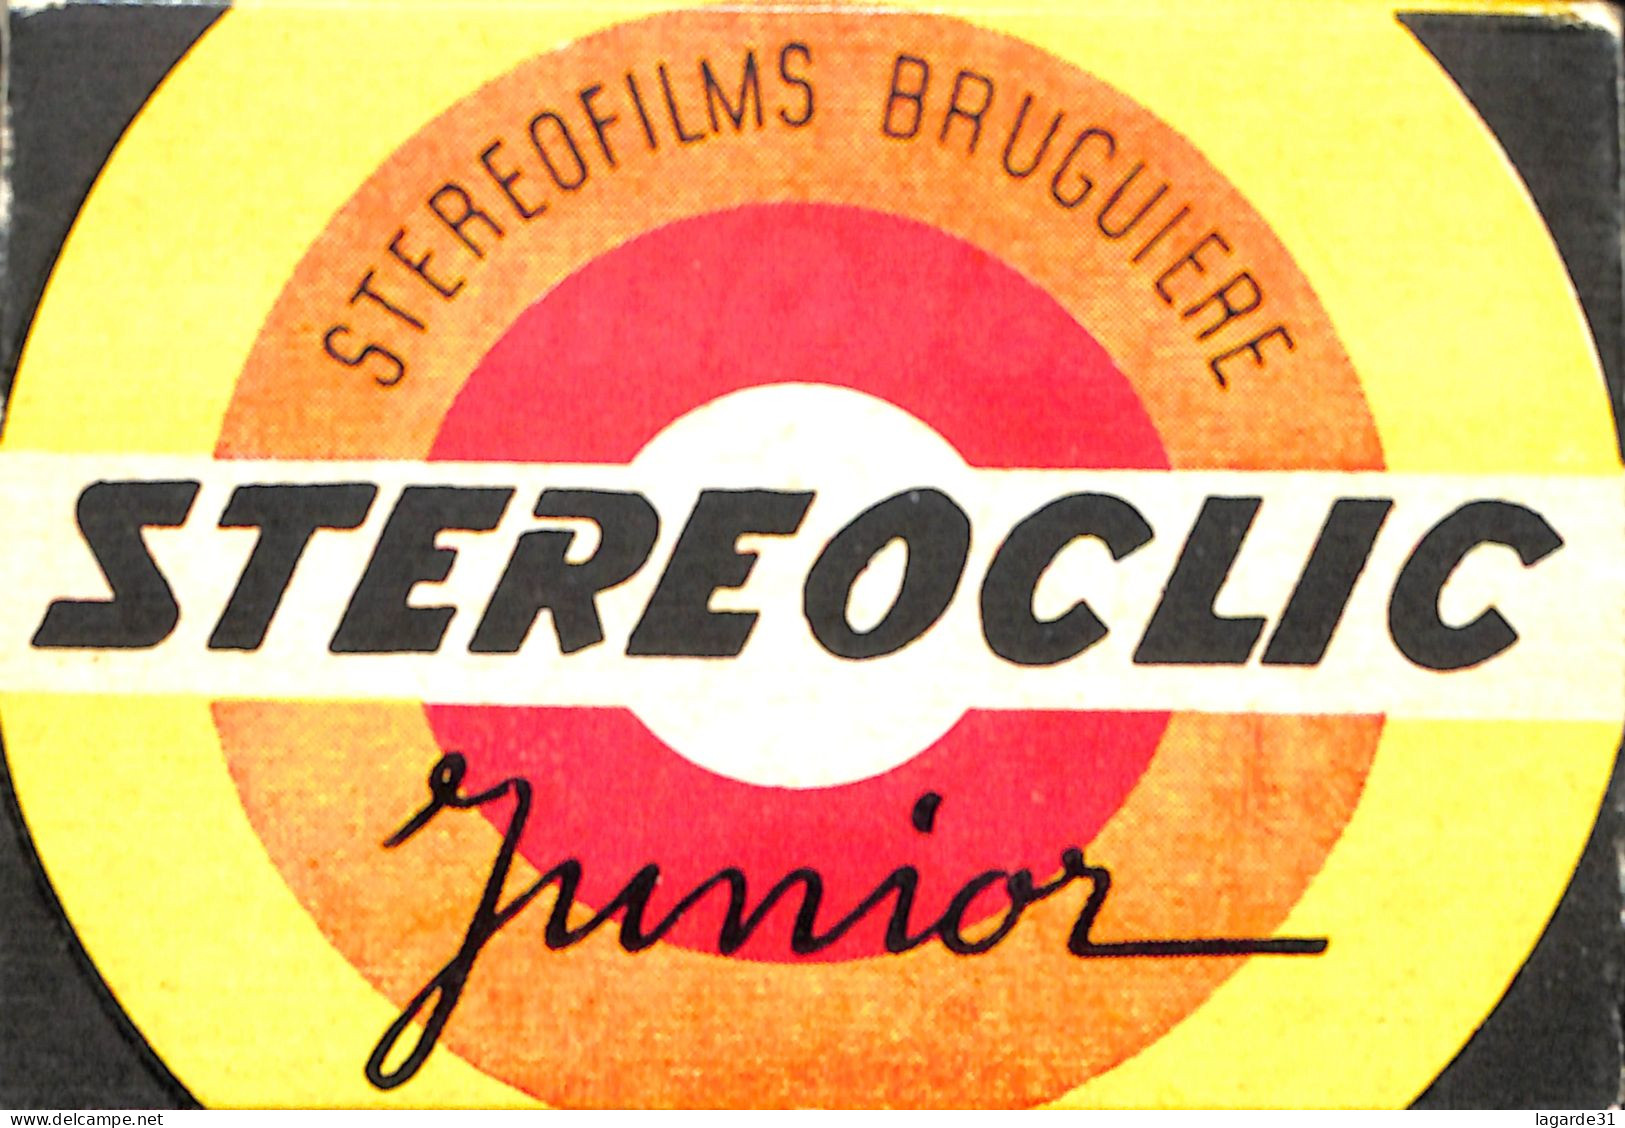 Stereoscope "stereoclic" Et Stereocartes Brugiere - Stereoscopes - Side-by-side Viewers